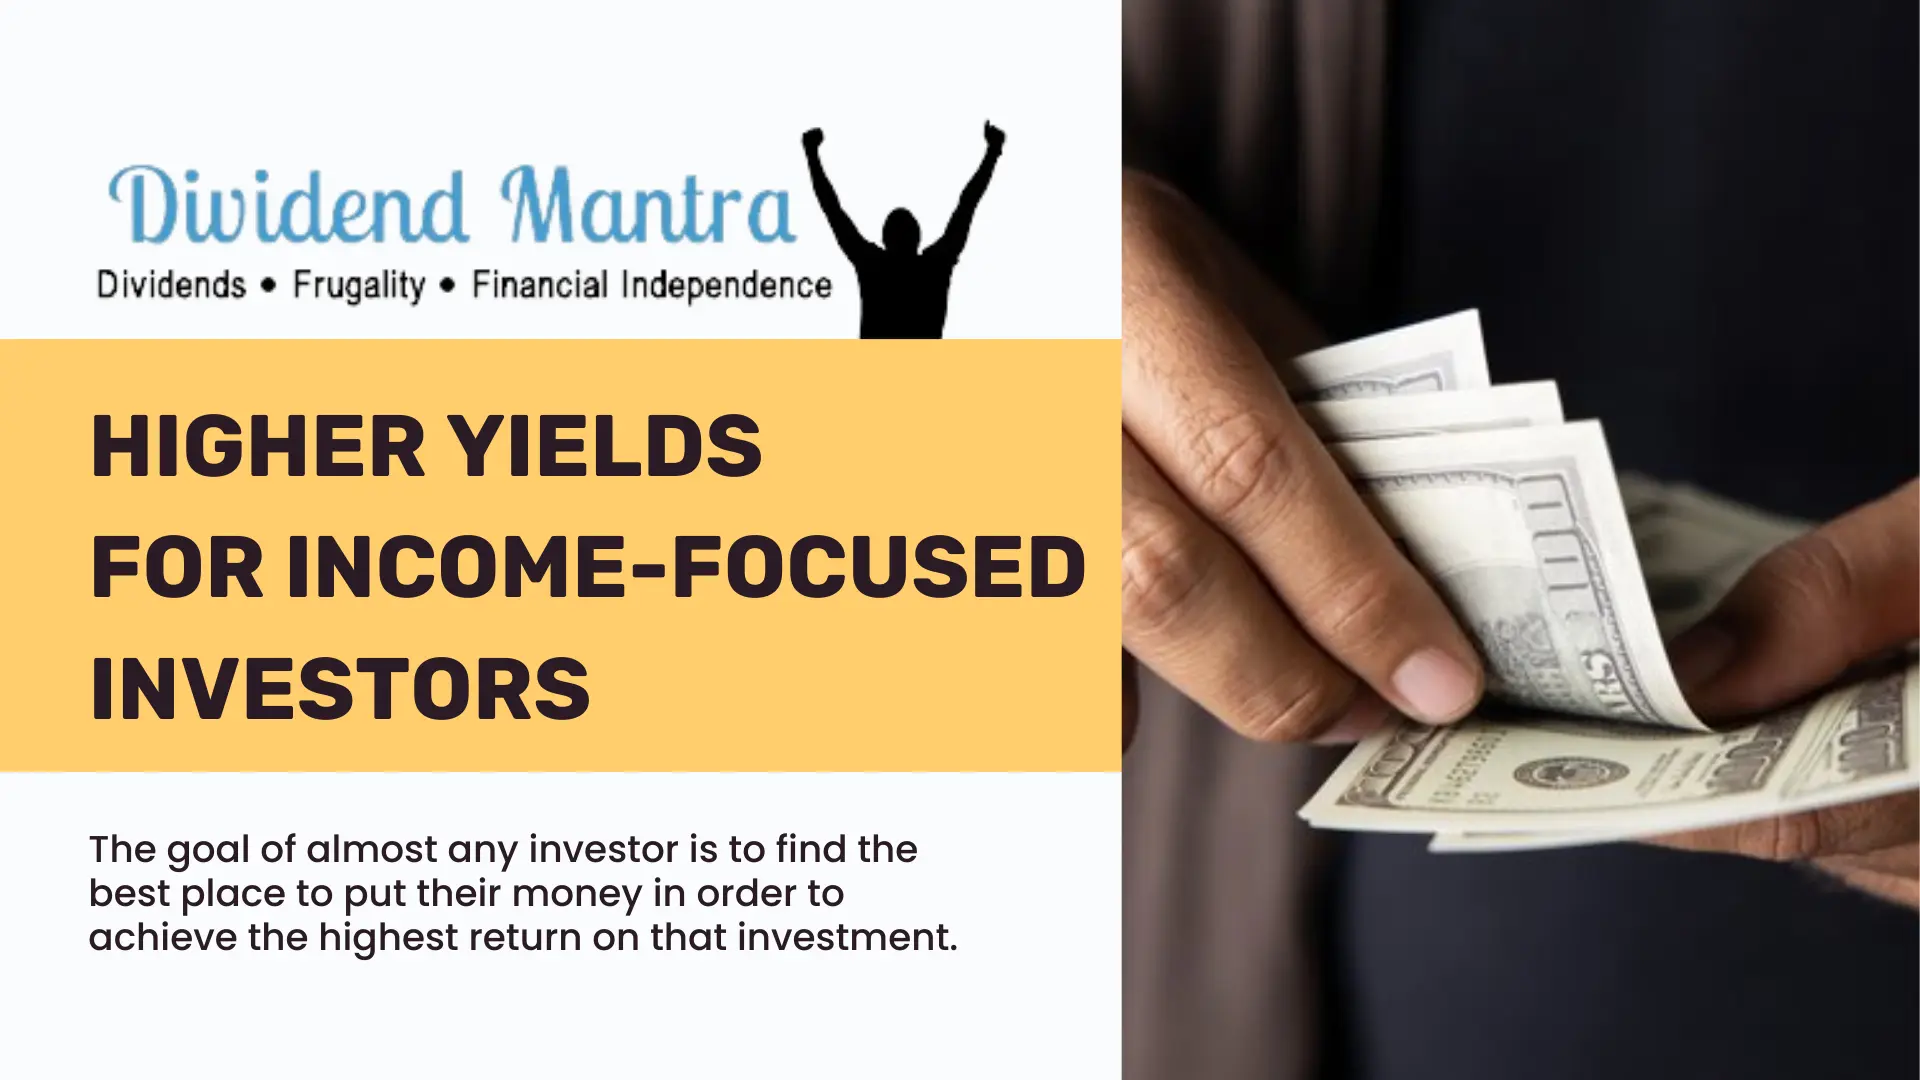 Higher Yields for Income-Focused Investors